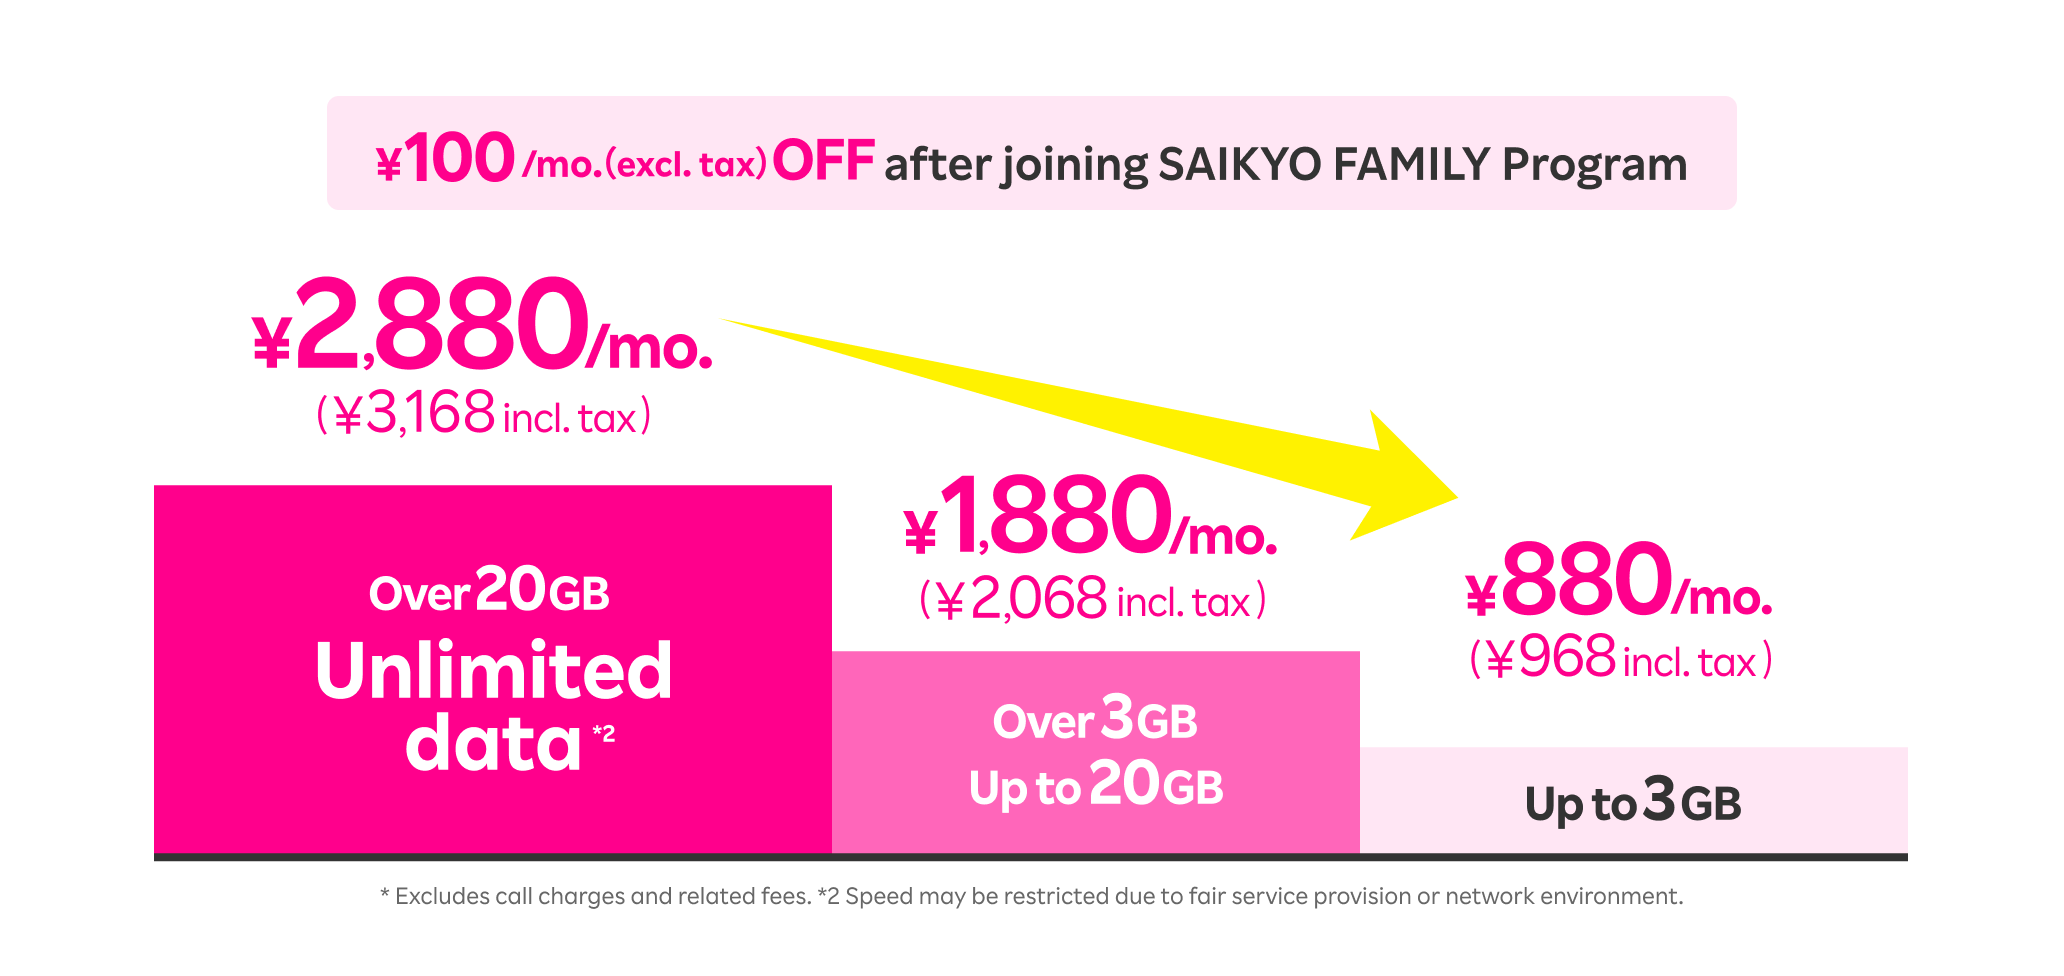 With the family discount applied, 880 yen/mo. (968 yen incl. tax) for up to 3GB or 2,880 yen/mo. (3,168 yen incl. tax) for unlimited high-speed data.